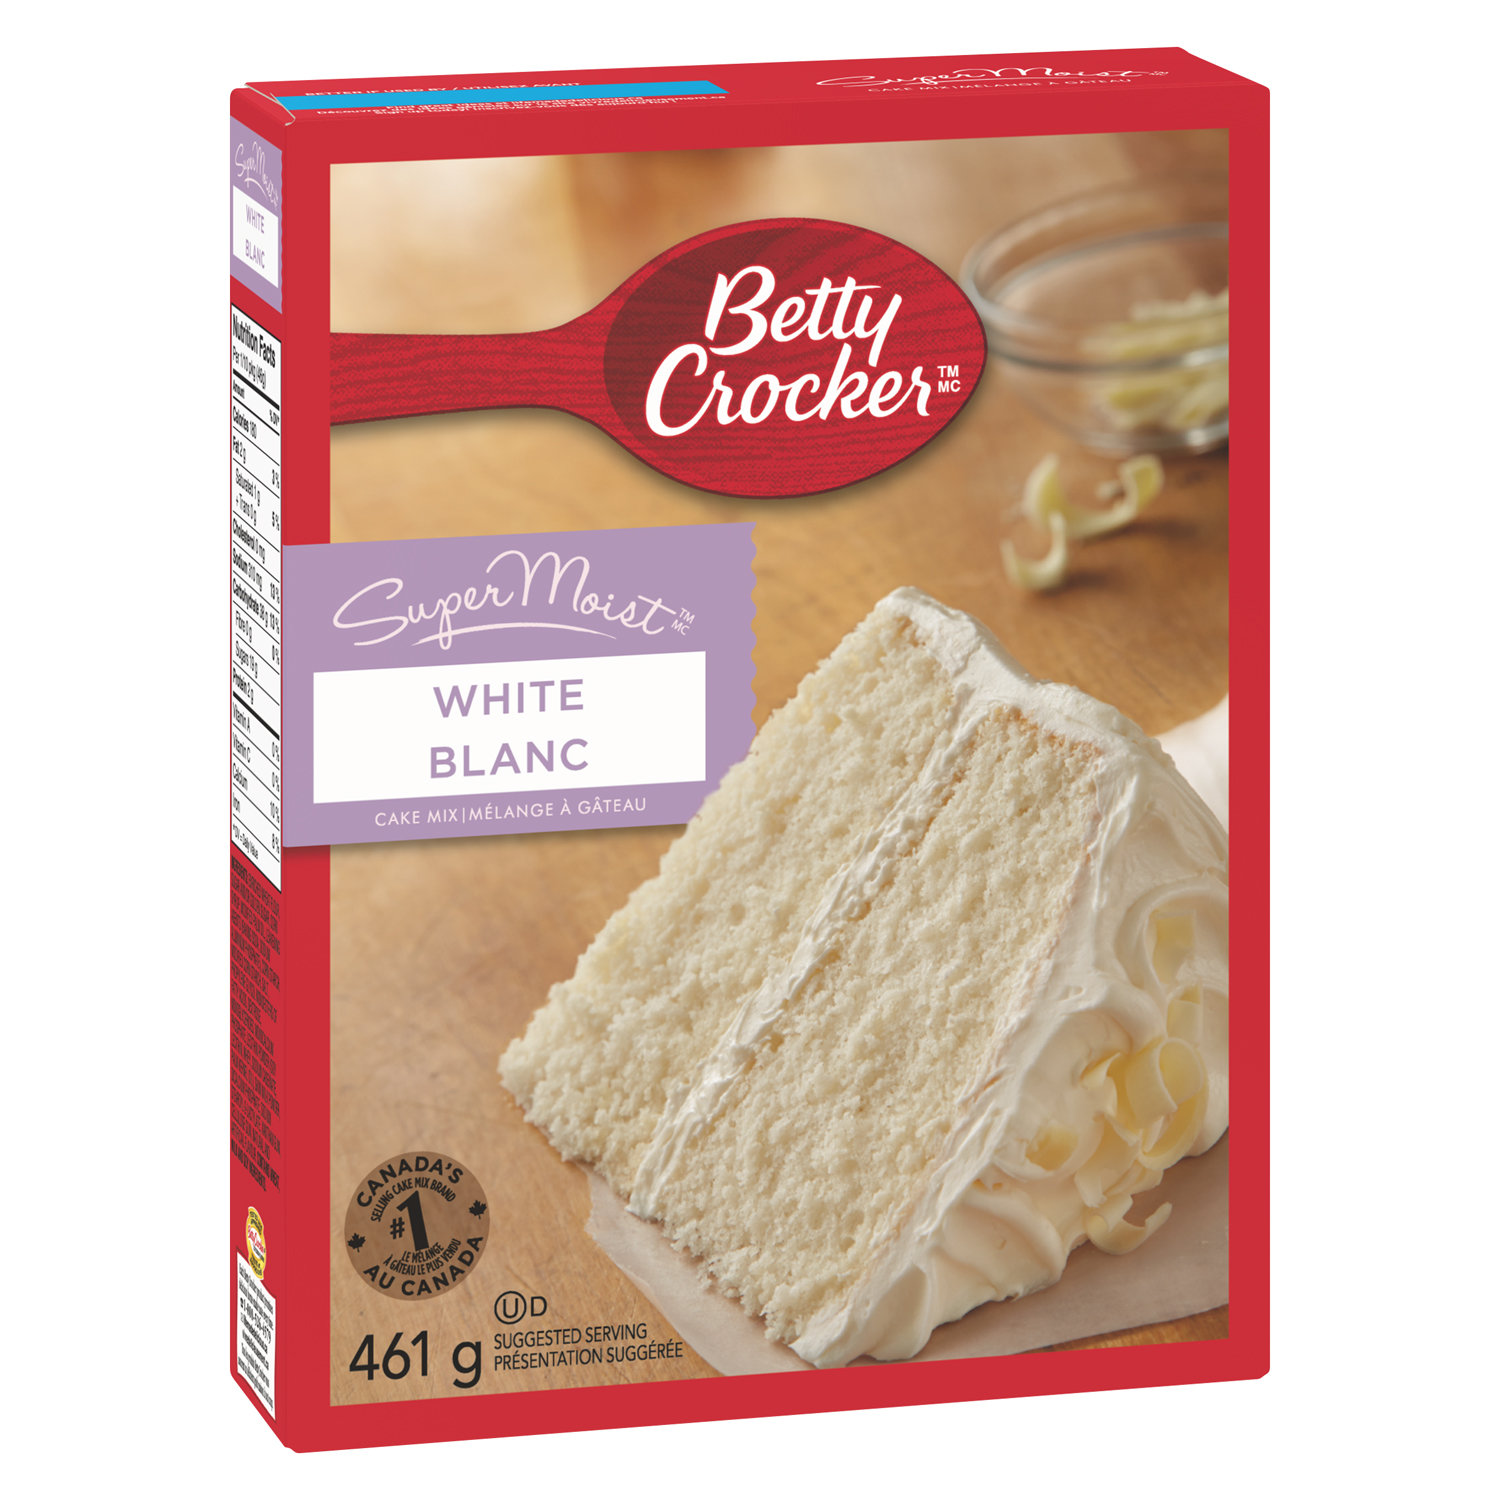 Box Cake Mix Hacks Turn Ordinary Into Bakery Quality Cakes - Ideas for the  Home